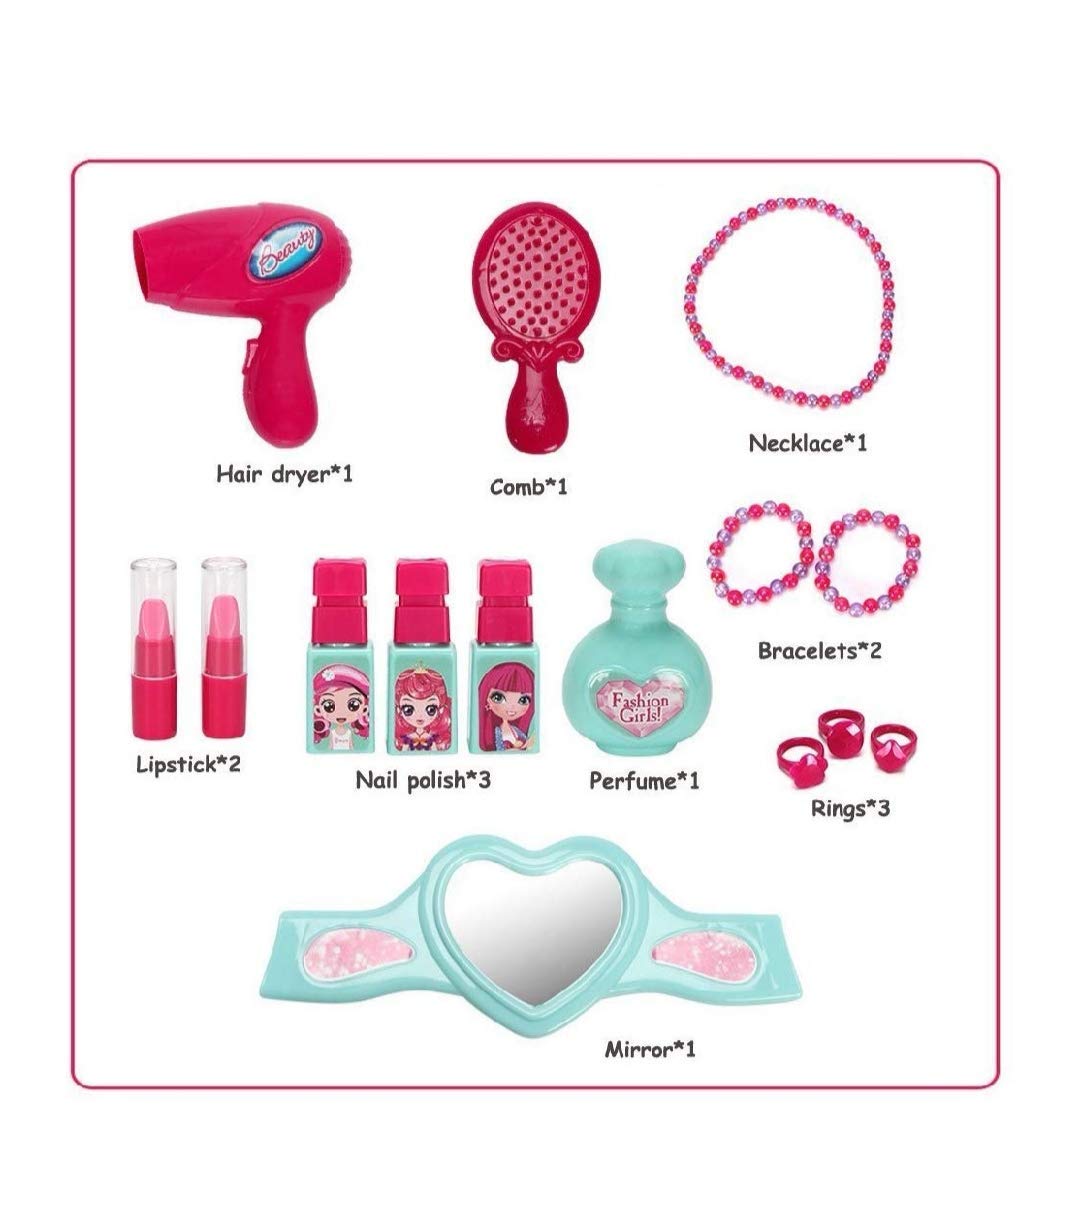 MM TOYS Pretend Play Make Up Case and Cosmetic Set for Girls: Pink Beauty Kit Hair Salon with 21 Pcs Durable Makeup Accessories - Suitable for Ages 3-8